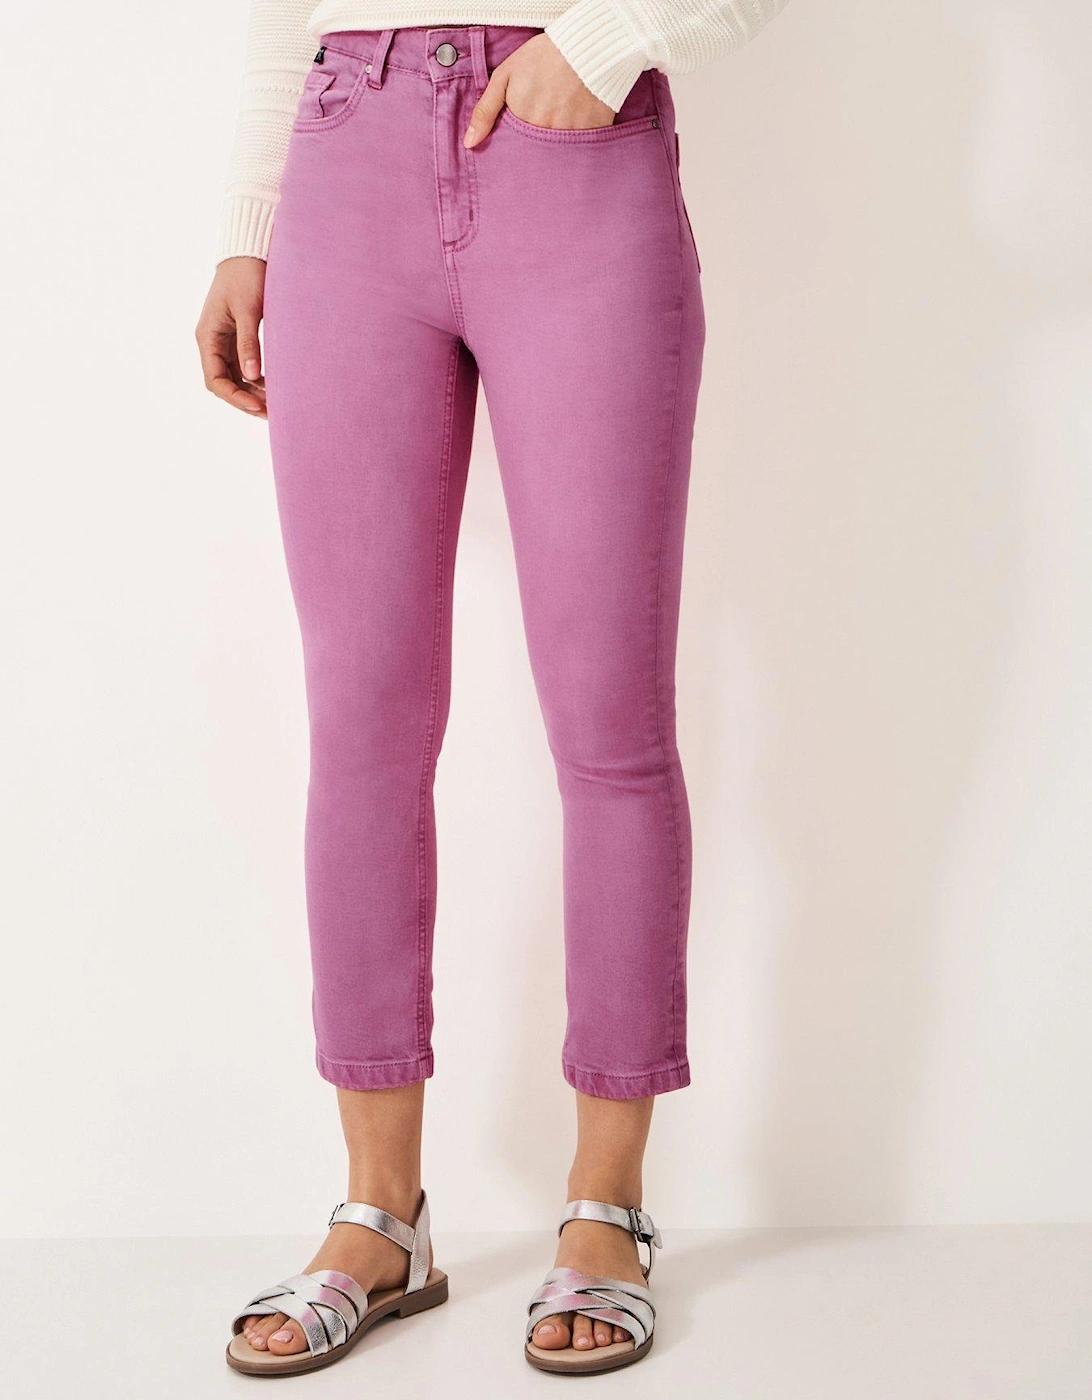 Cropped jeans - Pink, 2 of 1